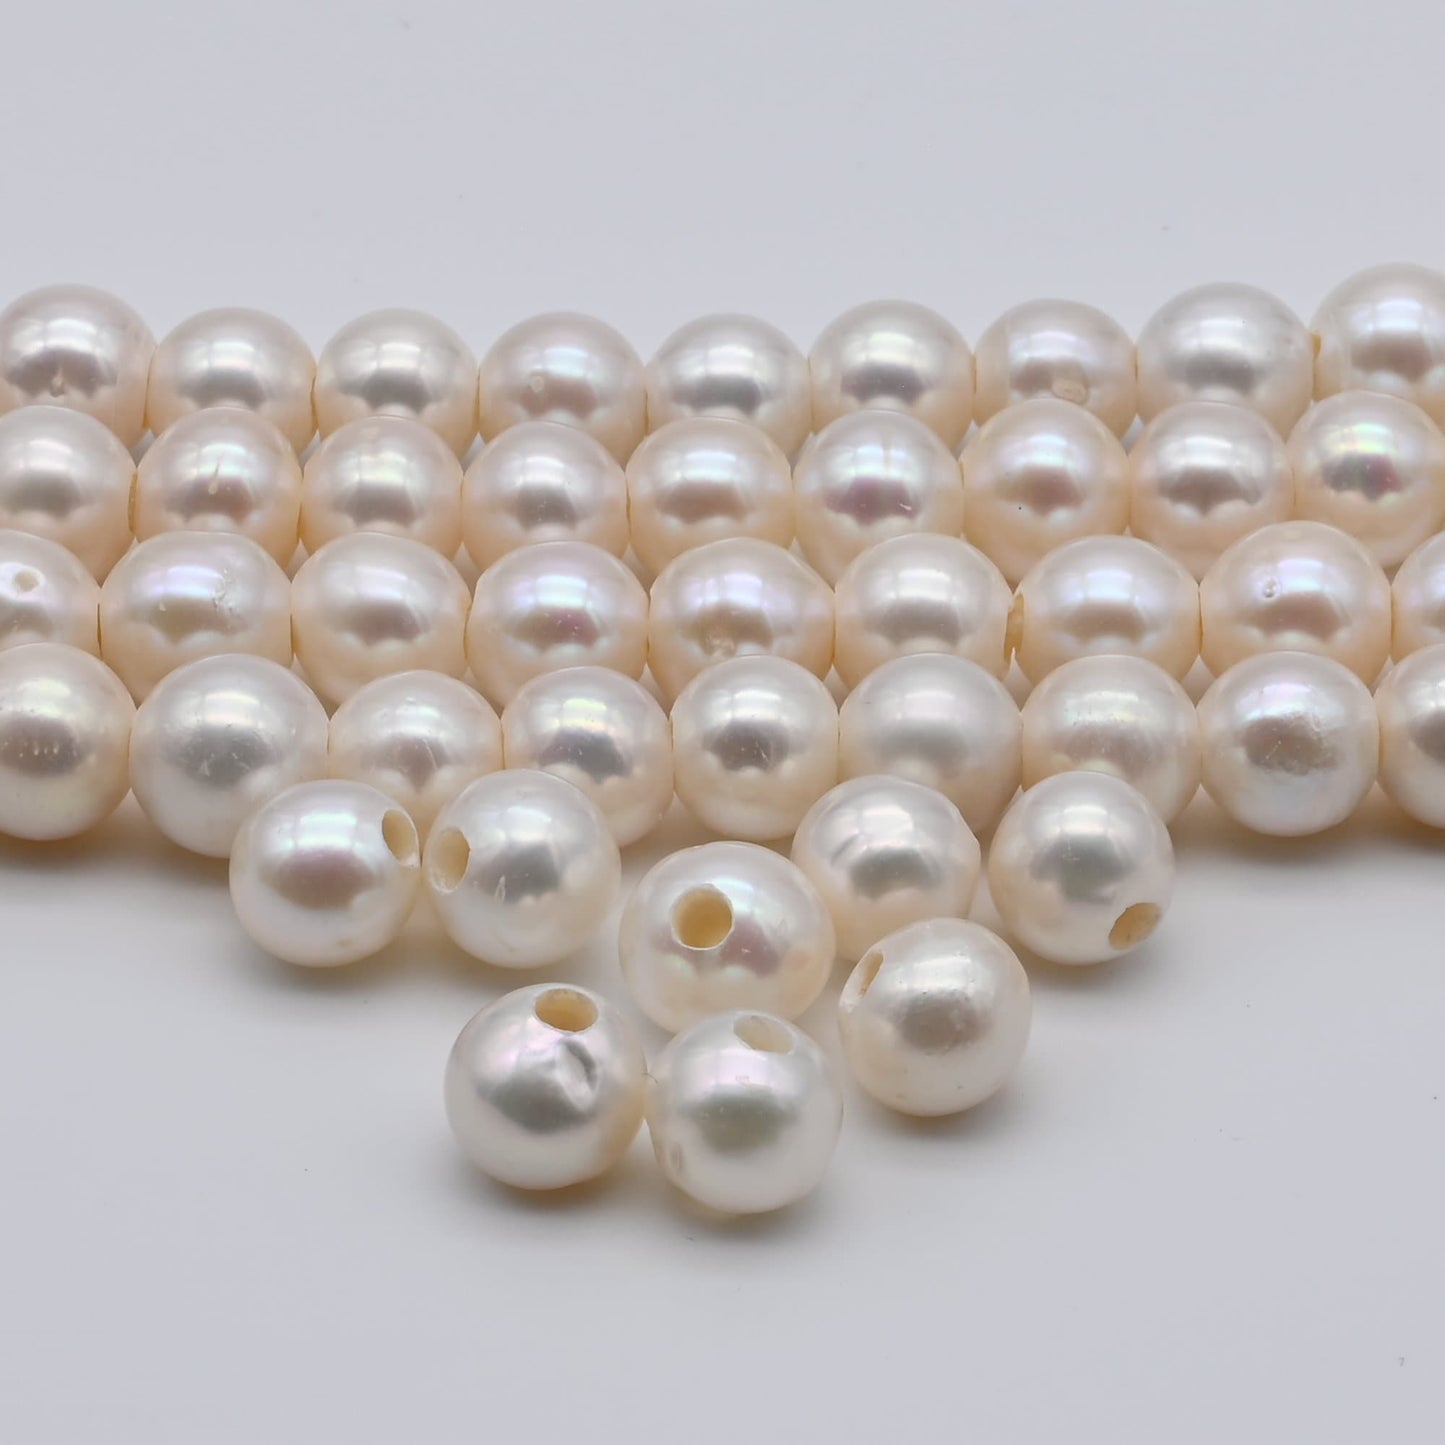 8.5-9mm Large Hole Round Pearls, Real Freshwater Pearl Strand, Genuine Pearl Beads in White Color,  Big Hole Bead in 2.5mm Hole, SKU#LHRD012